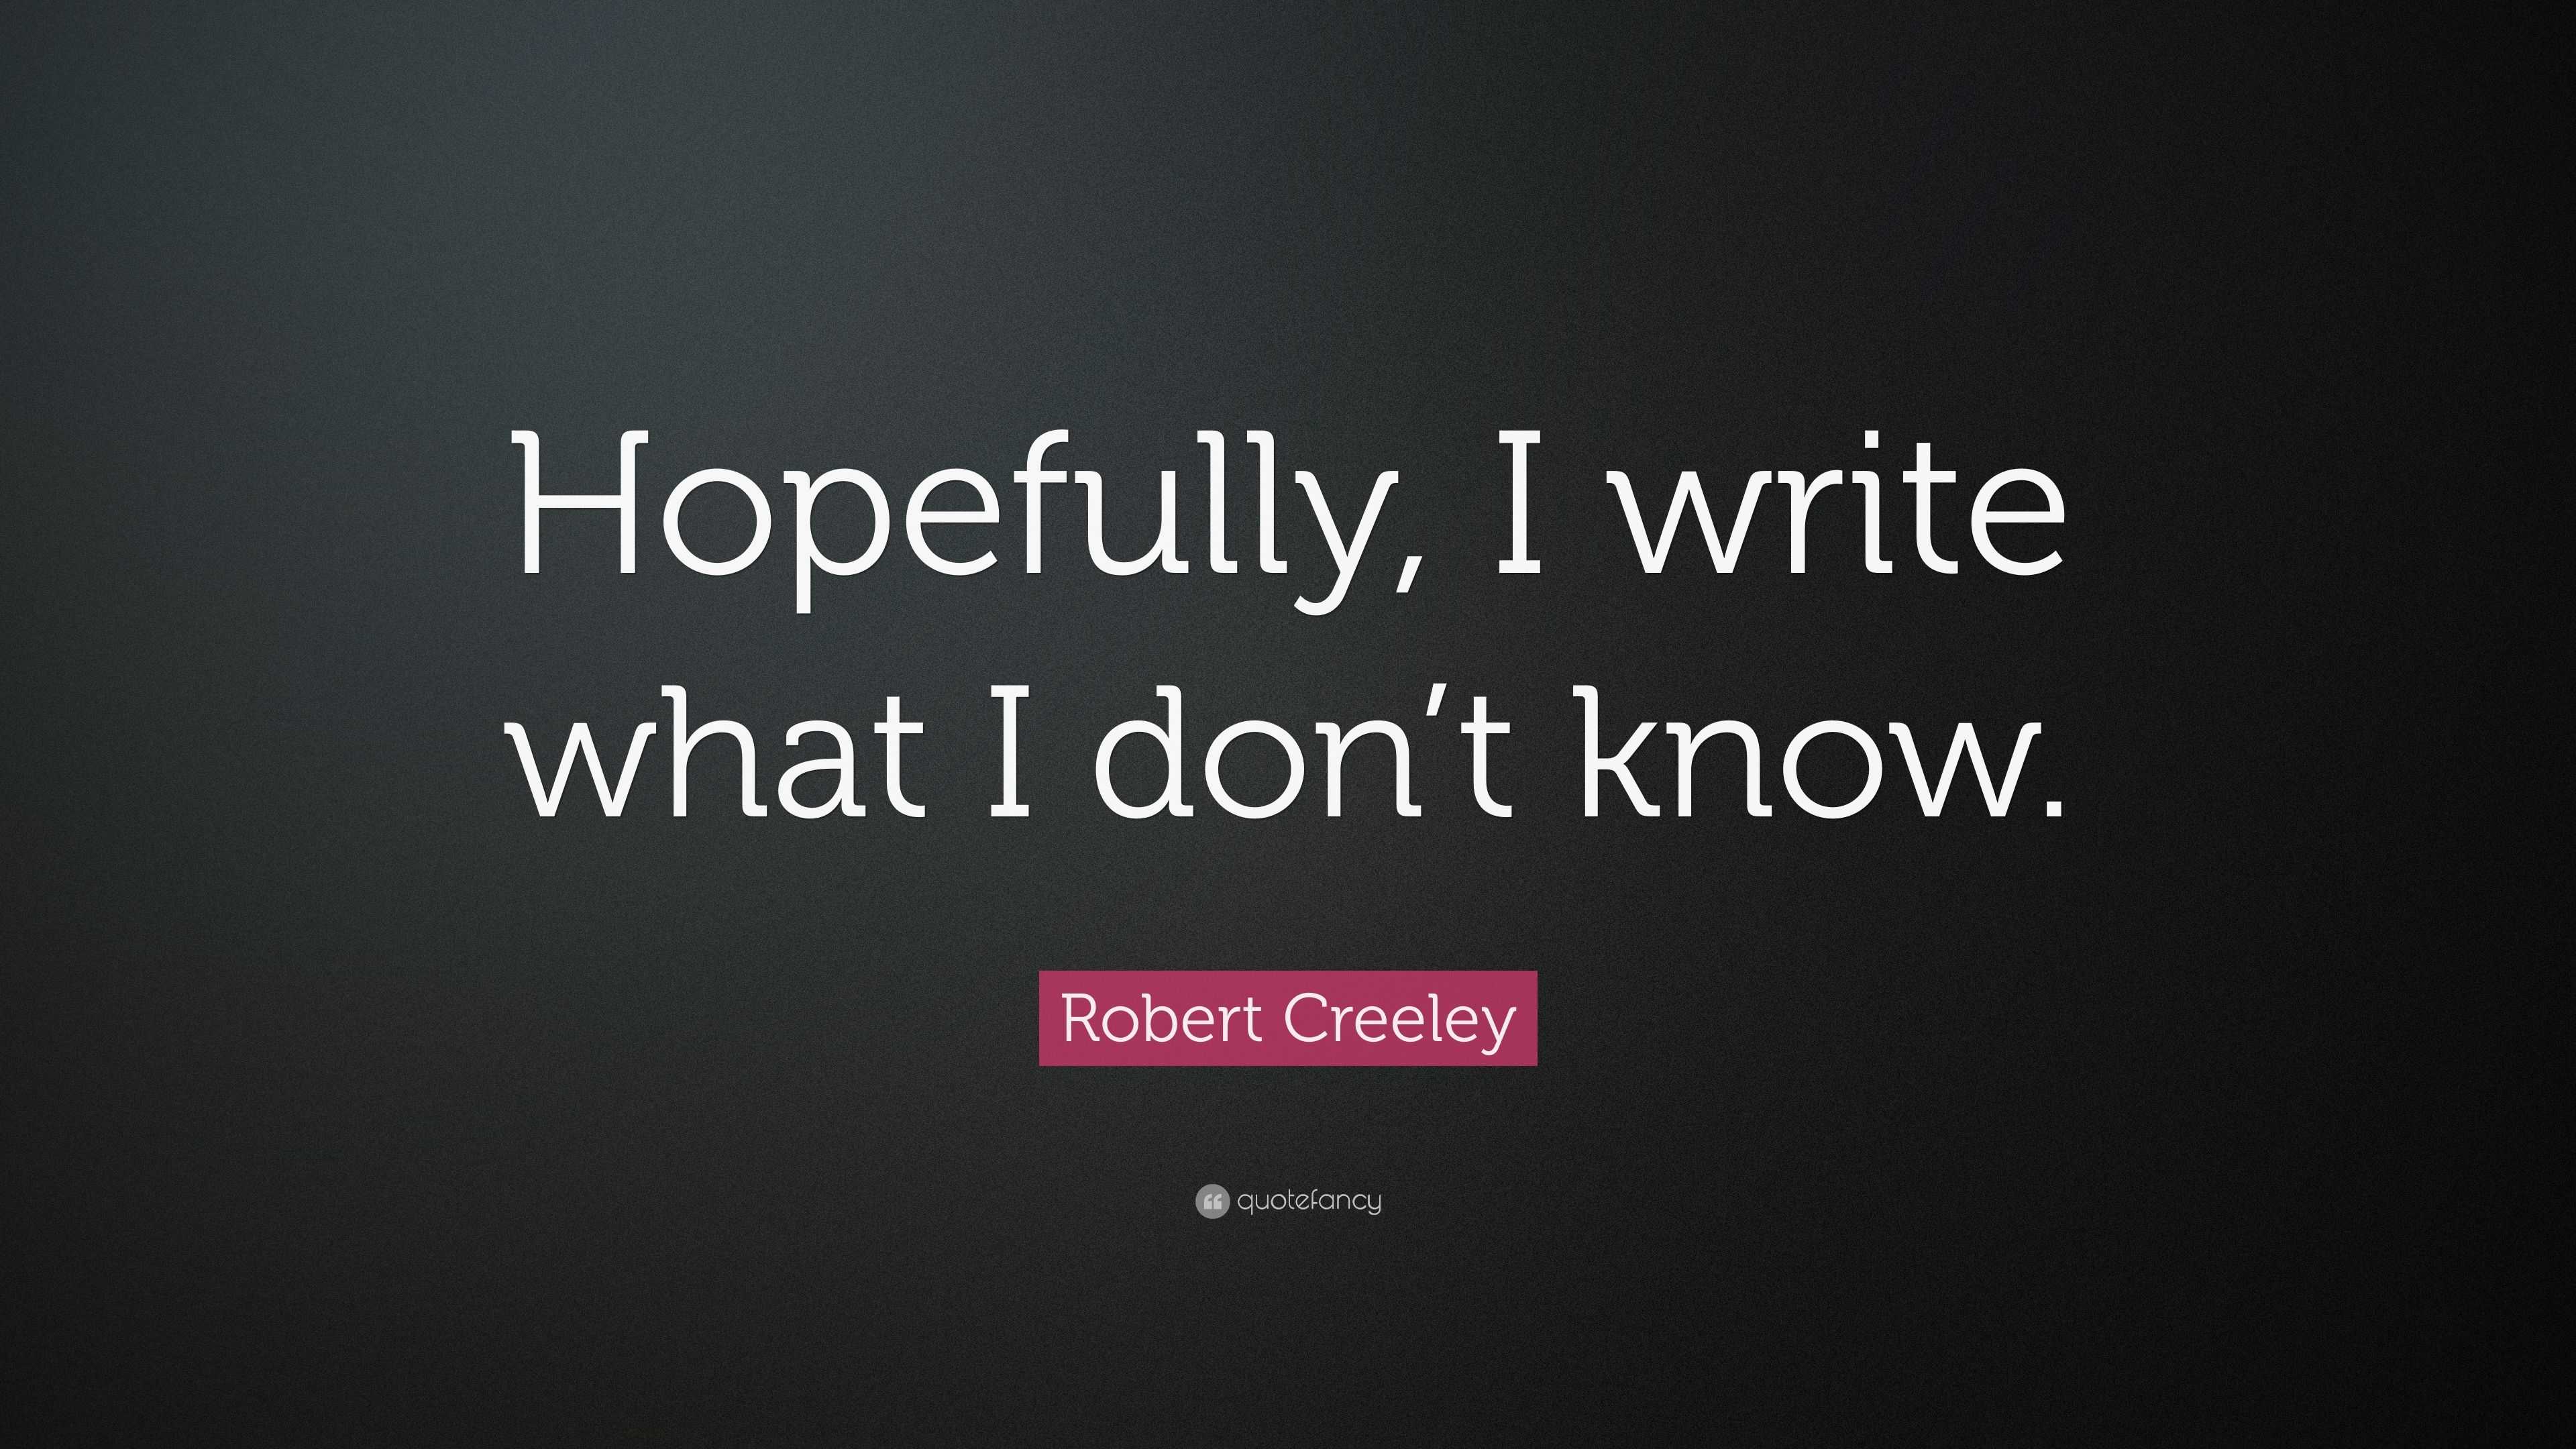 Robert Creeley Quote: “Hopefully, I write what I don’t know.”